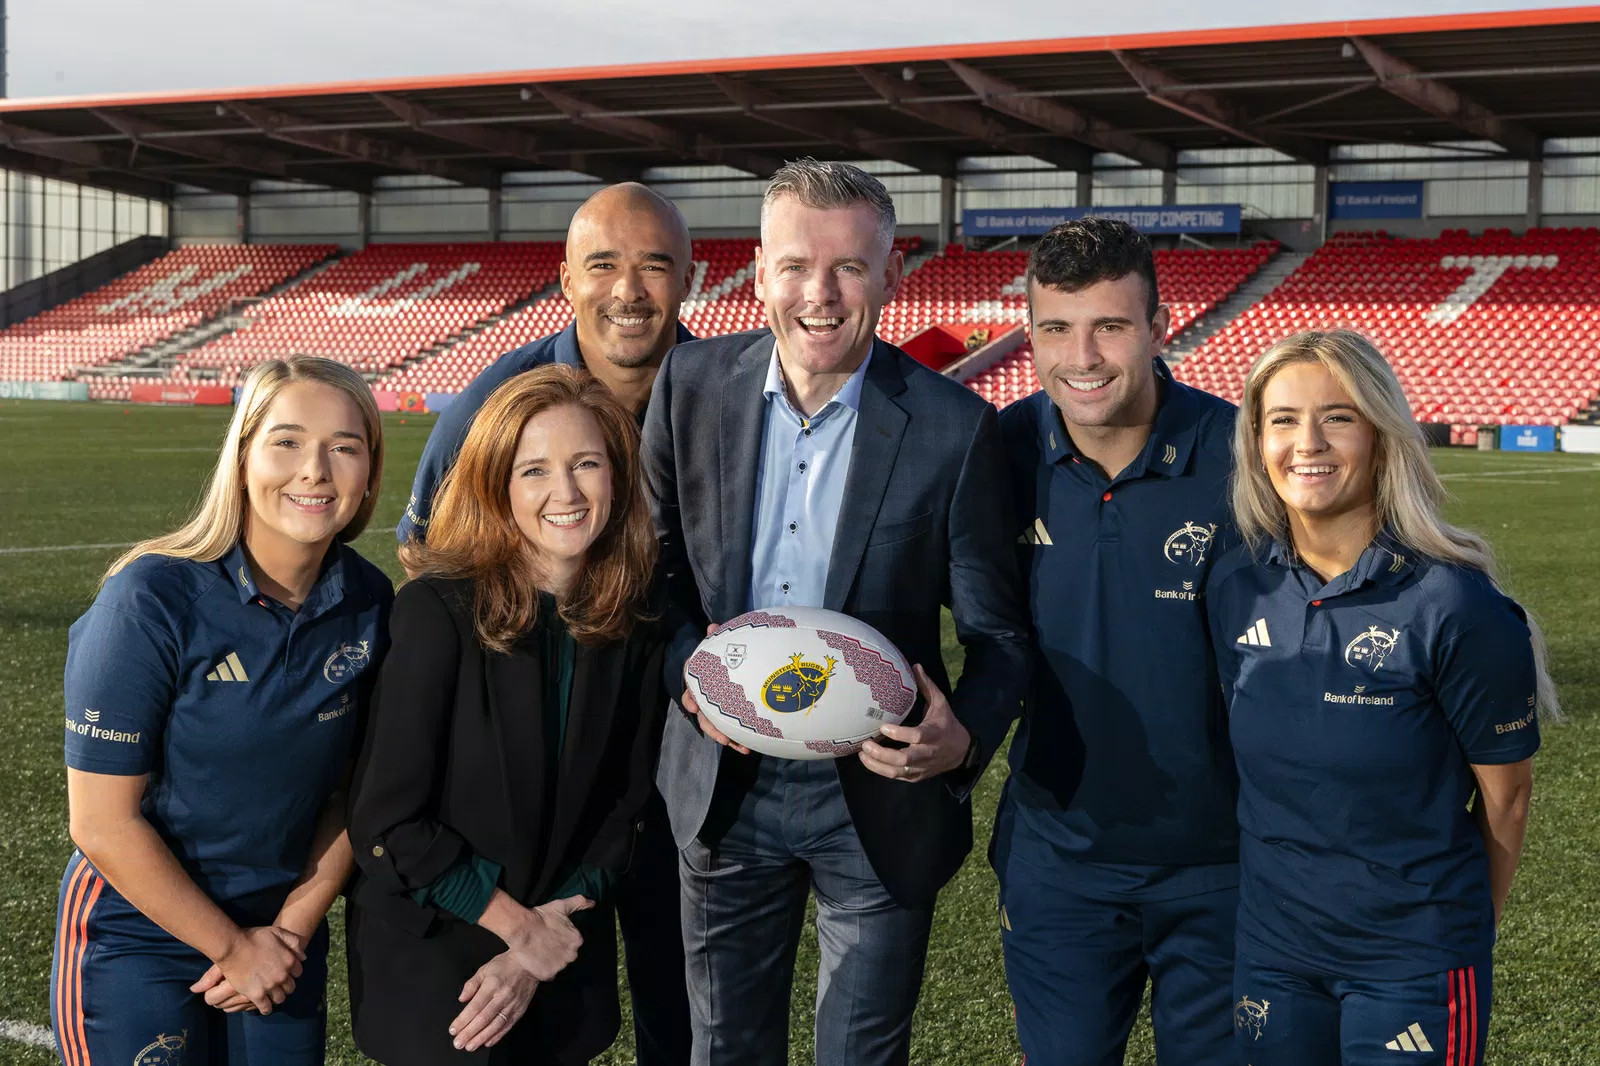 RDJ expands Munster Rugby sponsorship to include women's team